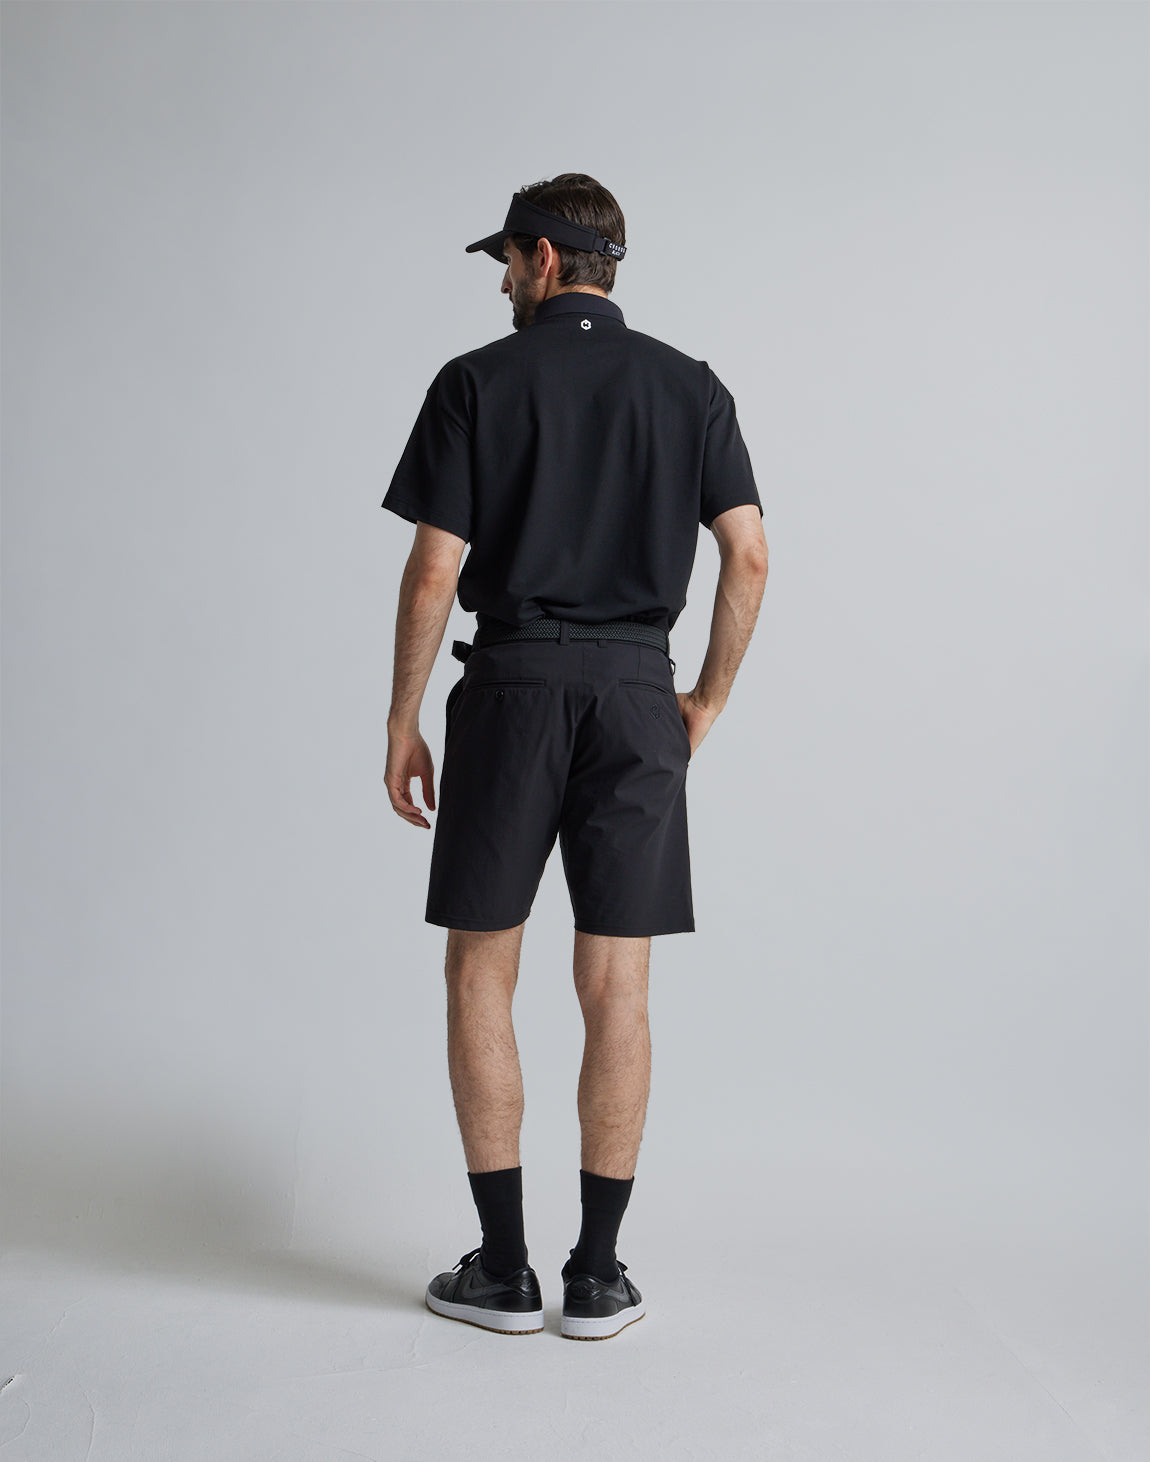 CRONOS BLACK 2LINE POLO – クロノス CRONOS Official Store